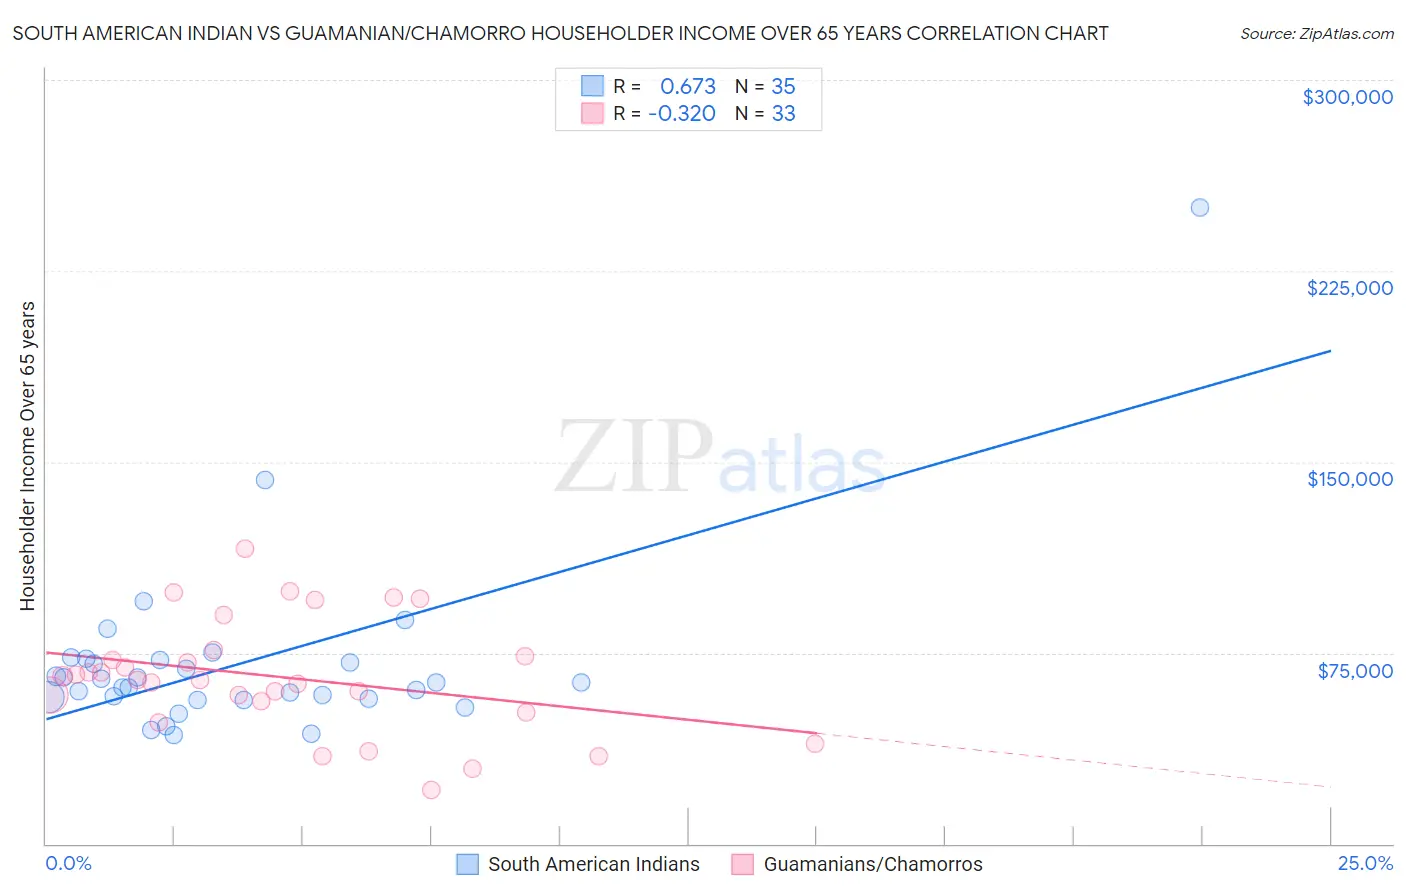 South American Indian vs Guamanian/Chamorro Householder Income Over 65 years